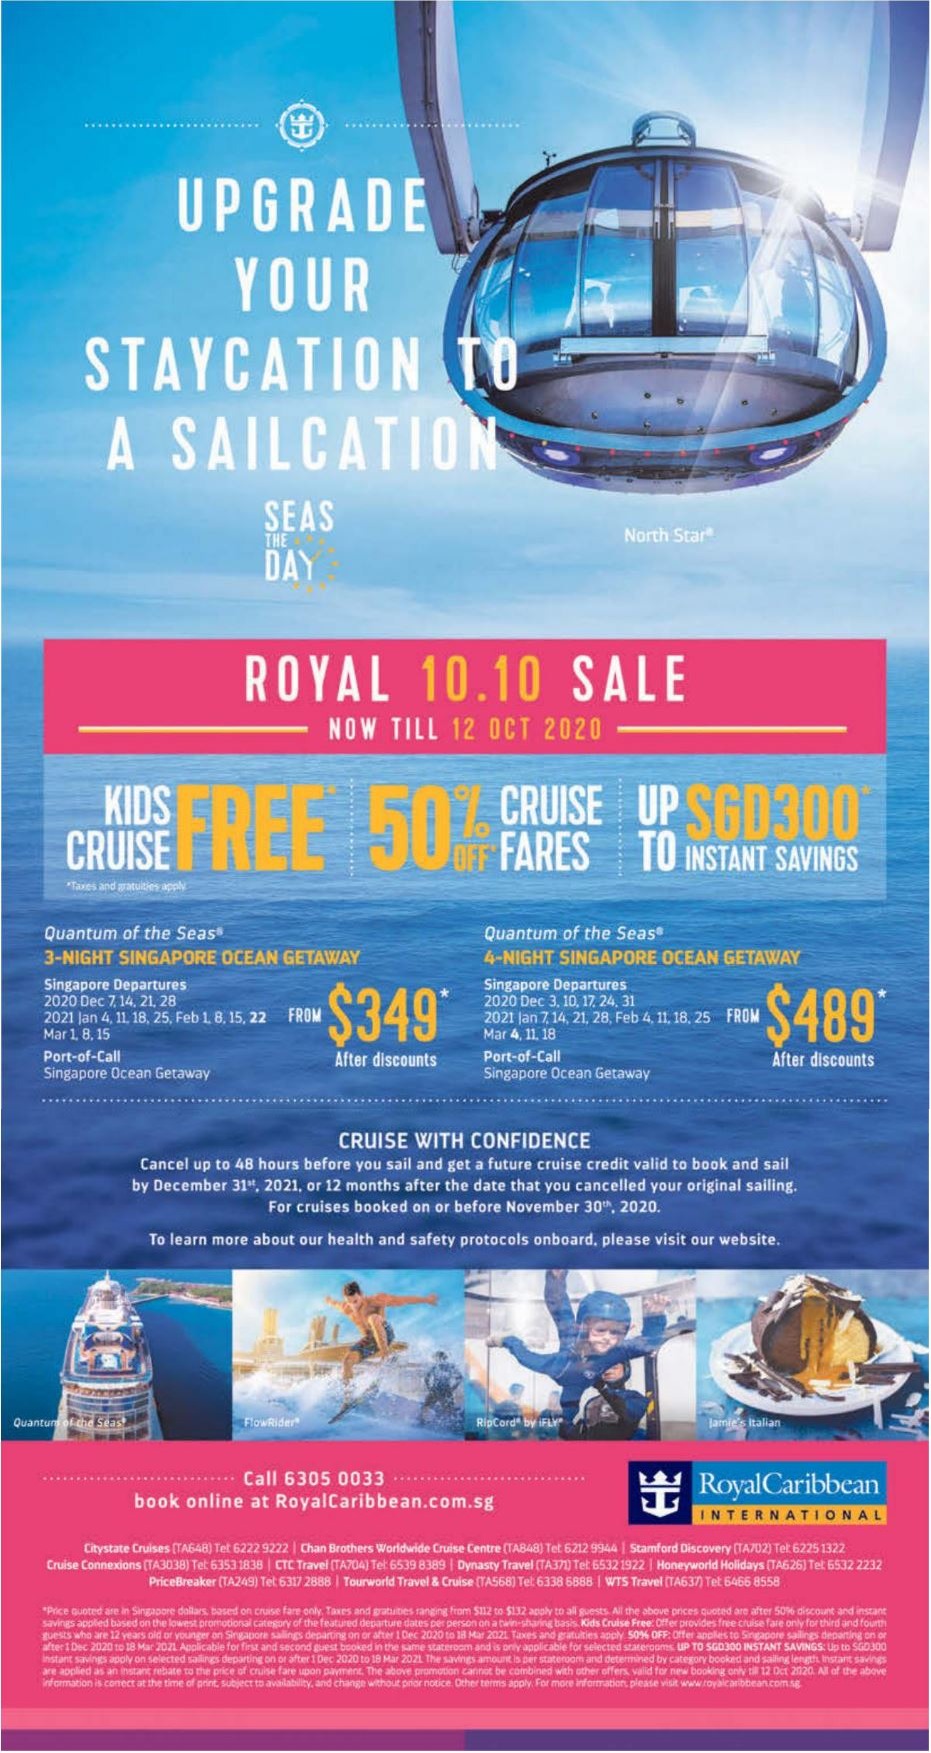 cruise deals from singapore